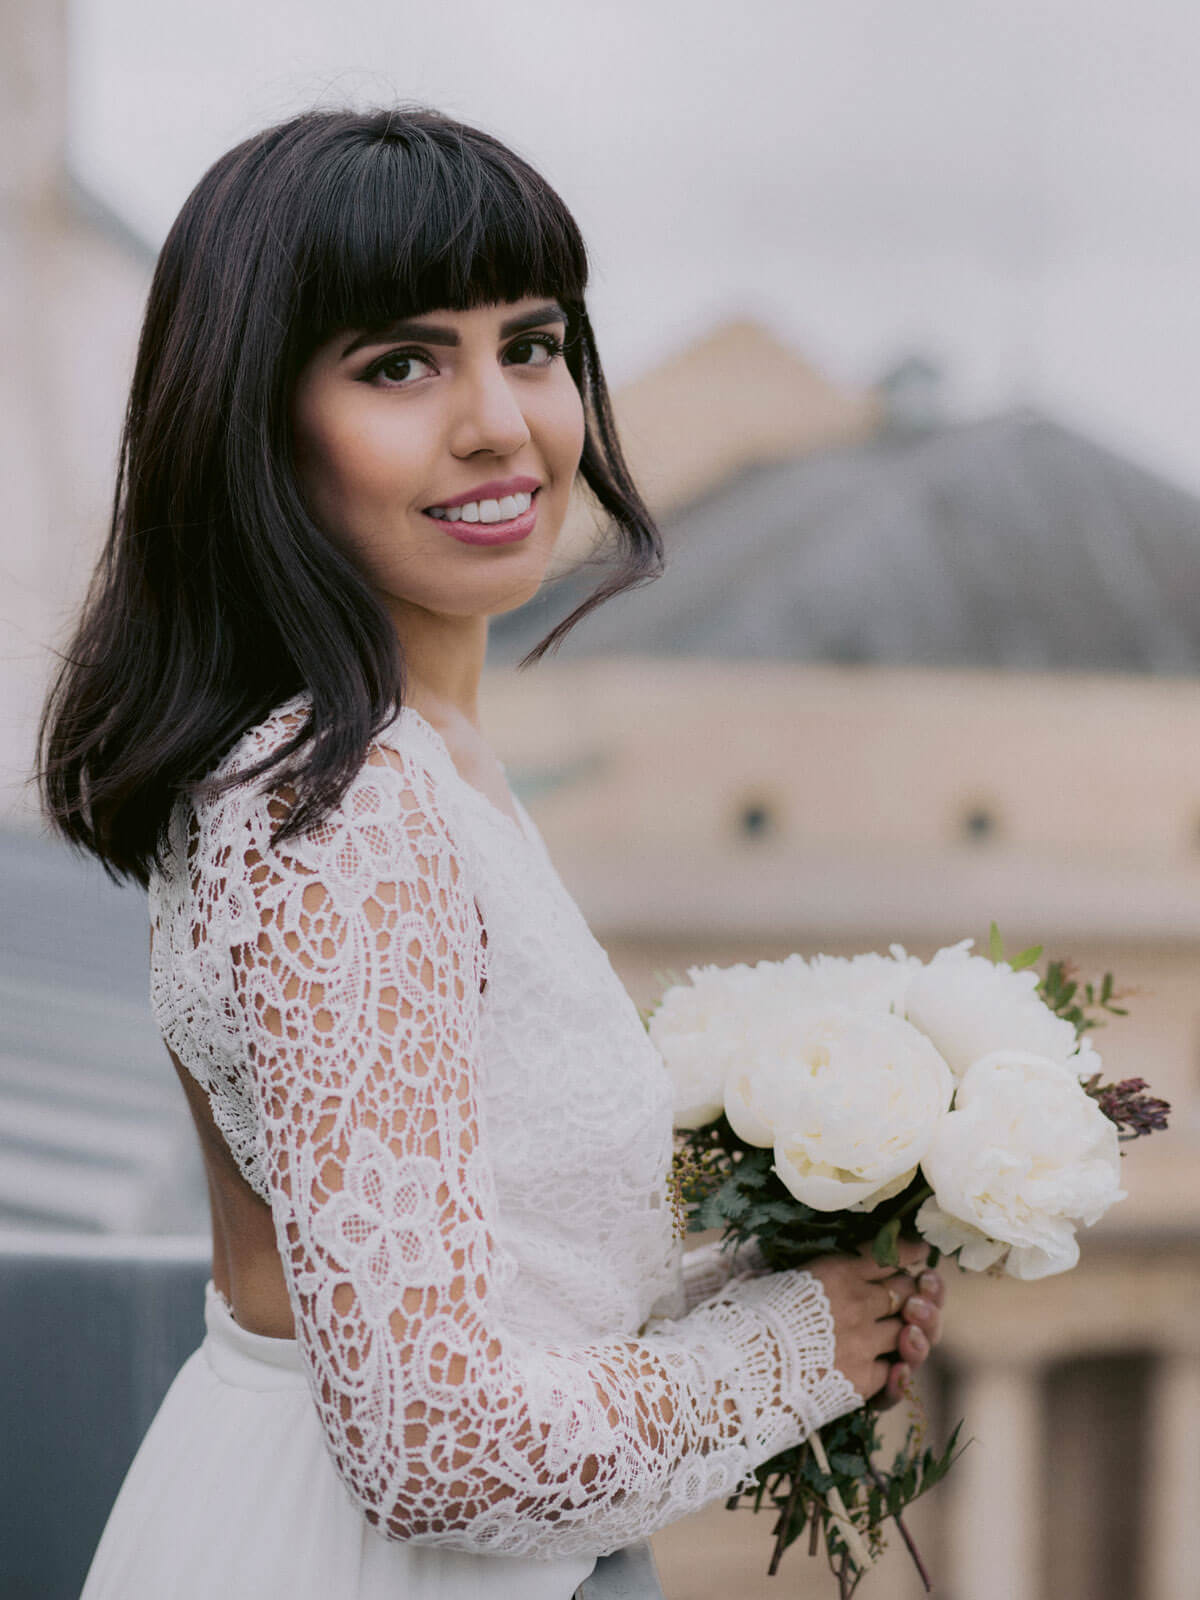 The pretty bride is smiling, holding her flower bouquet, in Paris, France. Image by Jenny Fu Studio